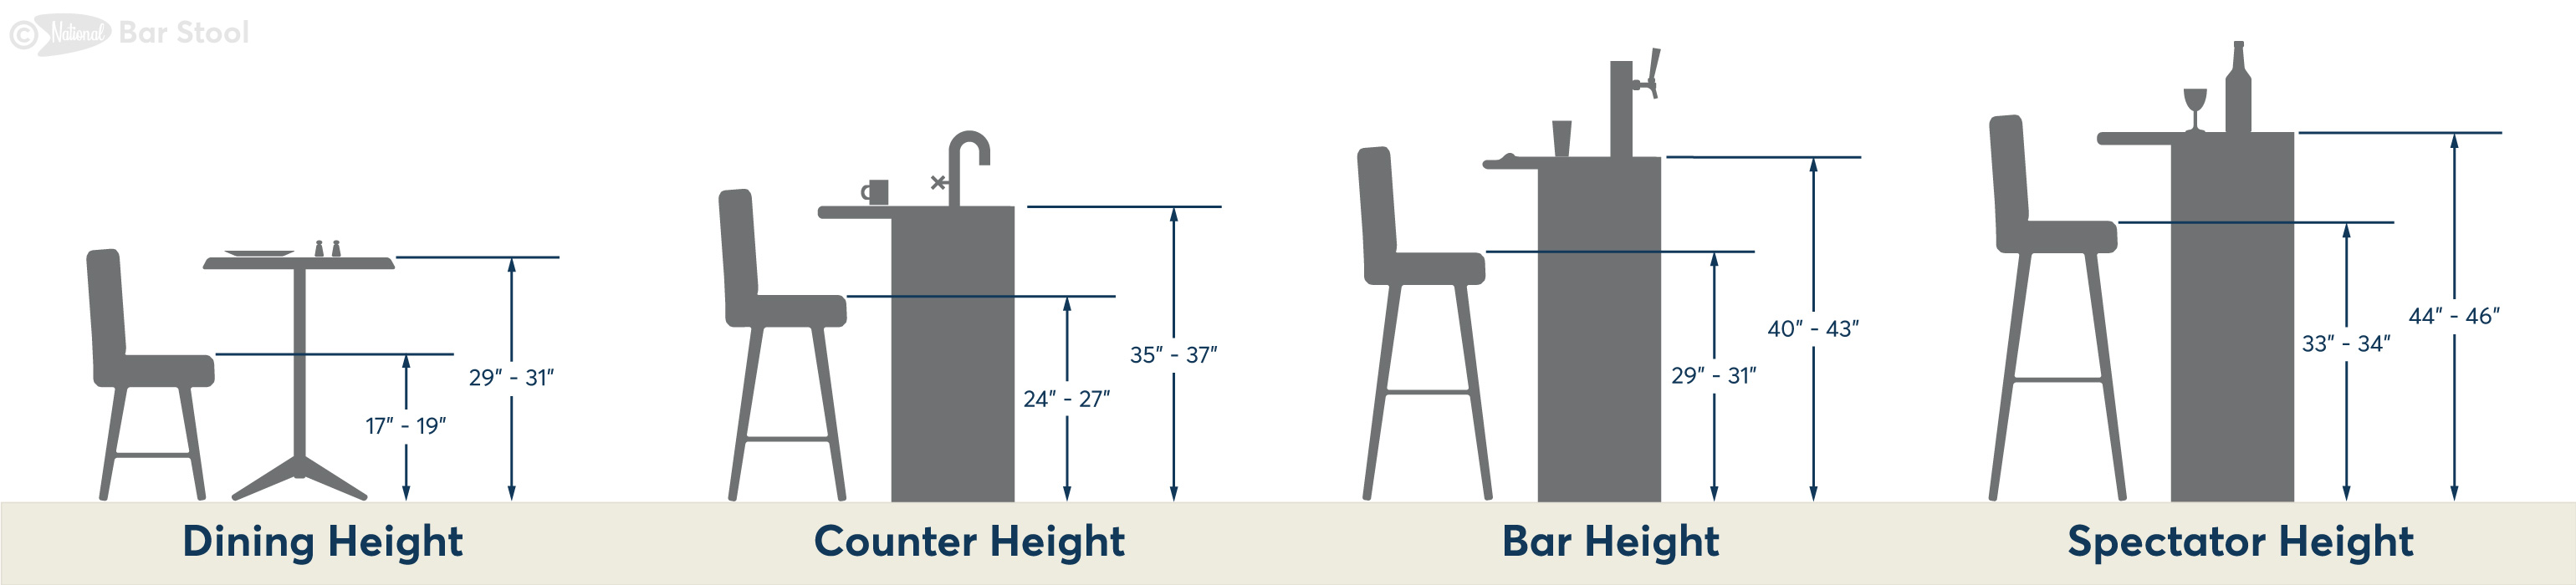 Bar Stool Ing Guide National, Typical Bar Stool Width